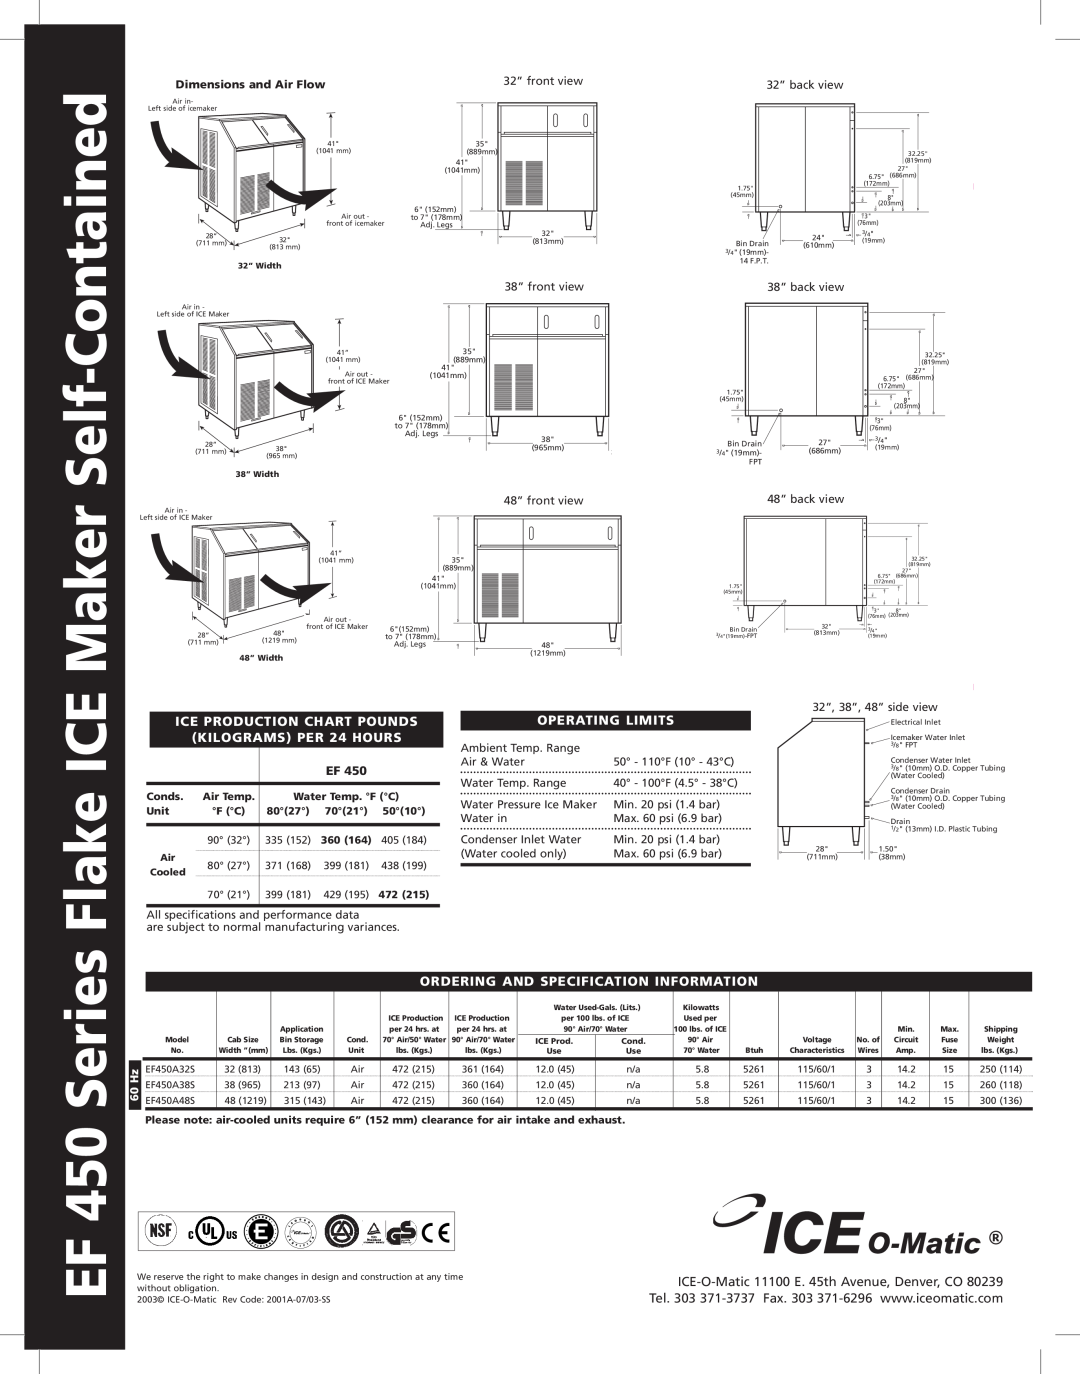 Ice-O-Matic manual Contained, Self, Maker, EF 450 Series Flake ICE, Ice Production Chart Pounds, KILOGRAMS PER 24 HOURS 